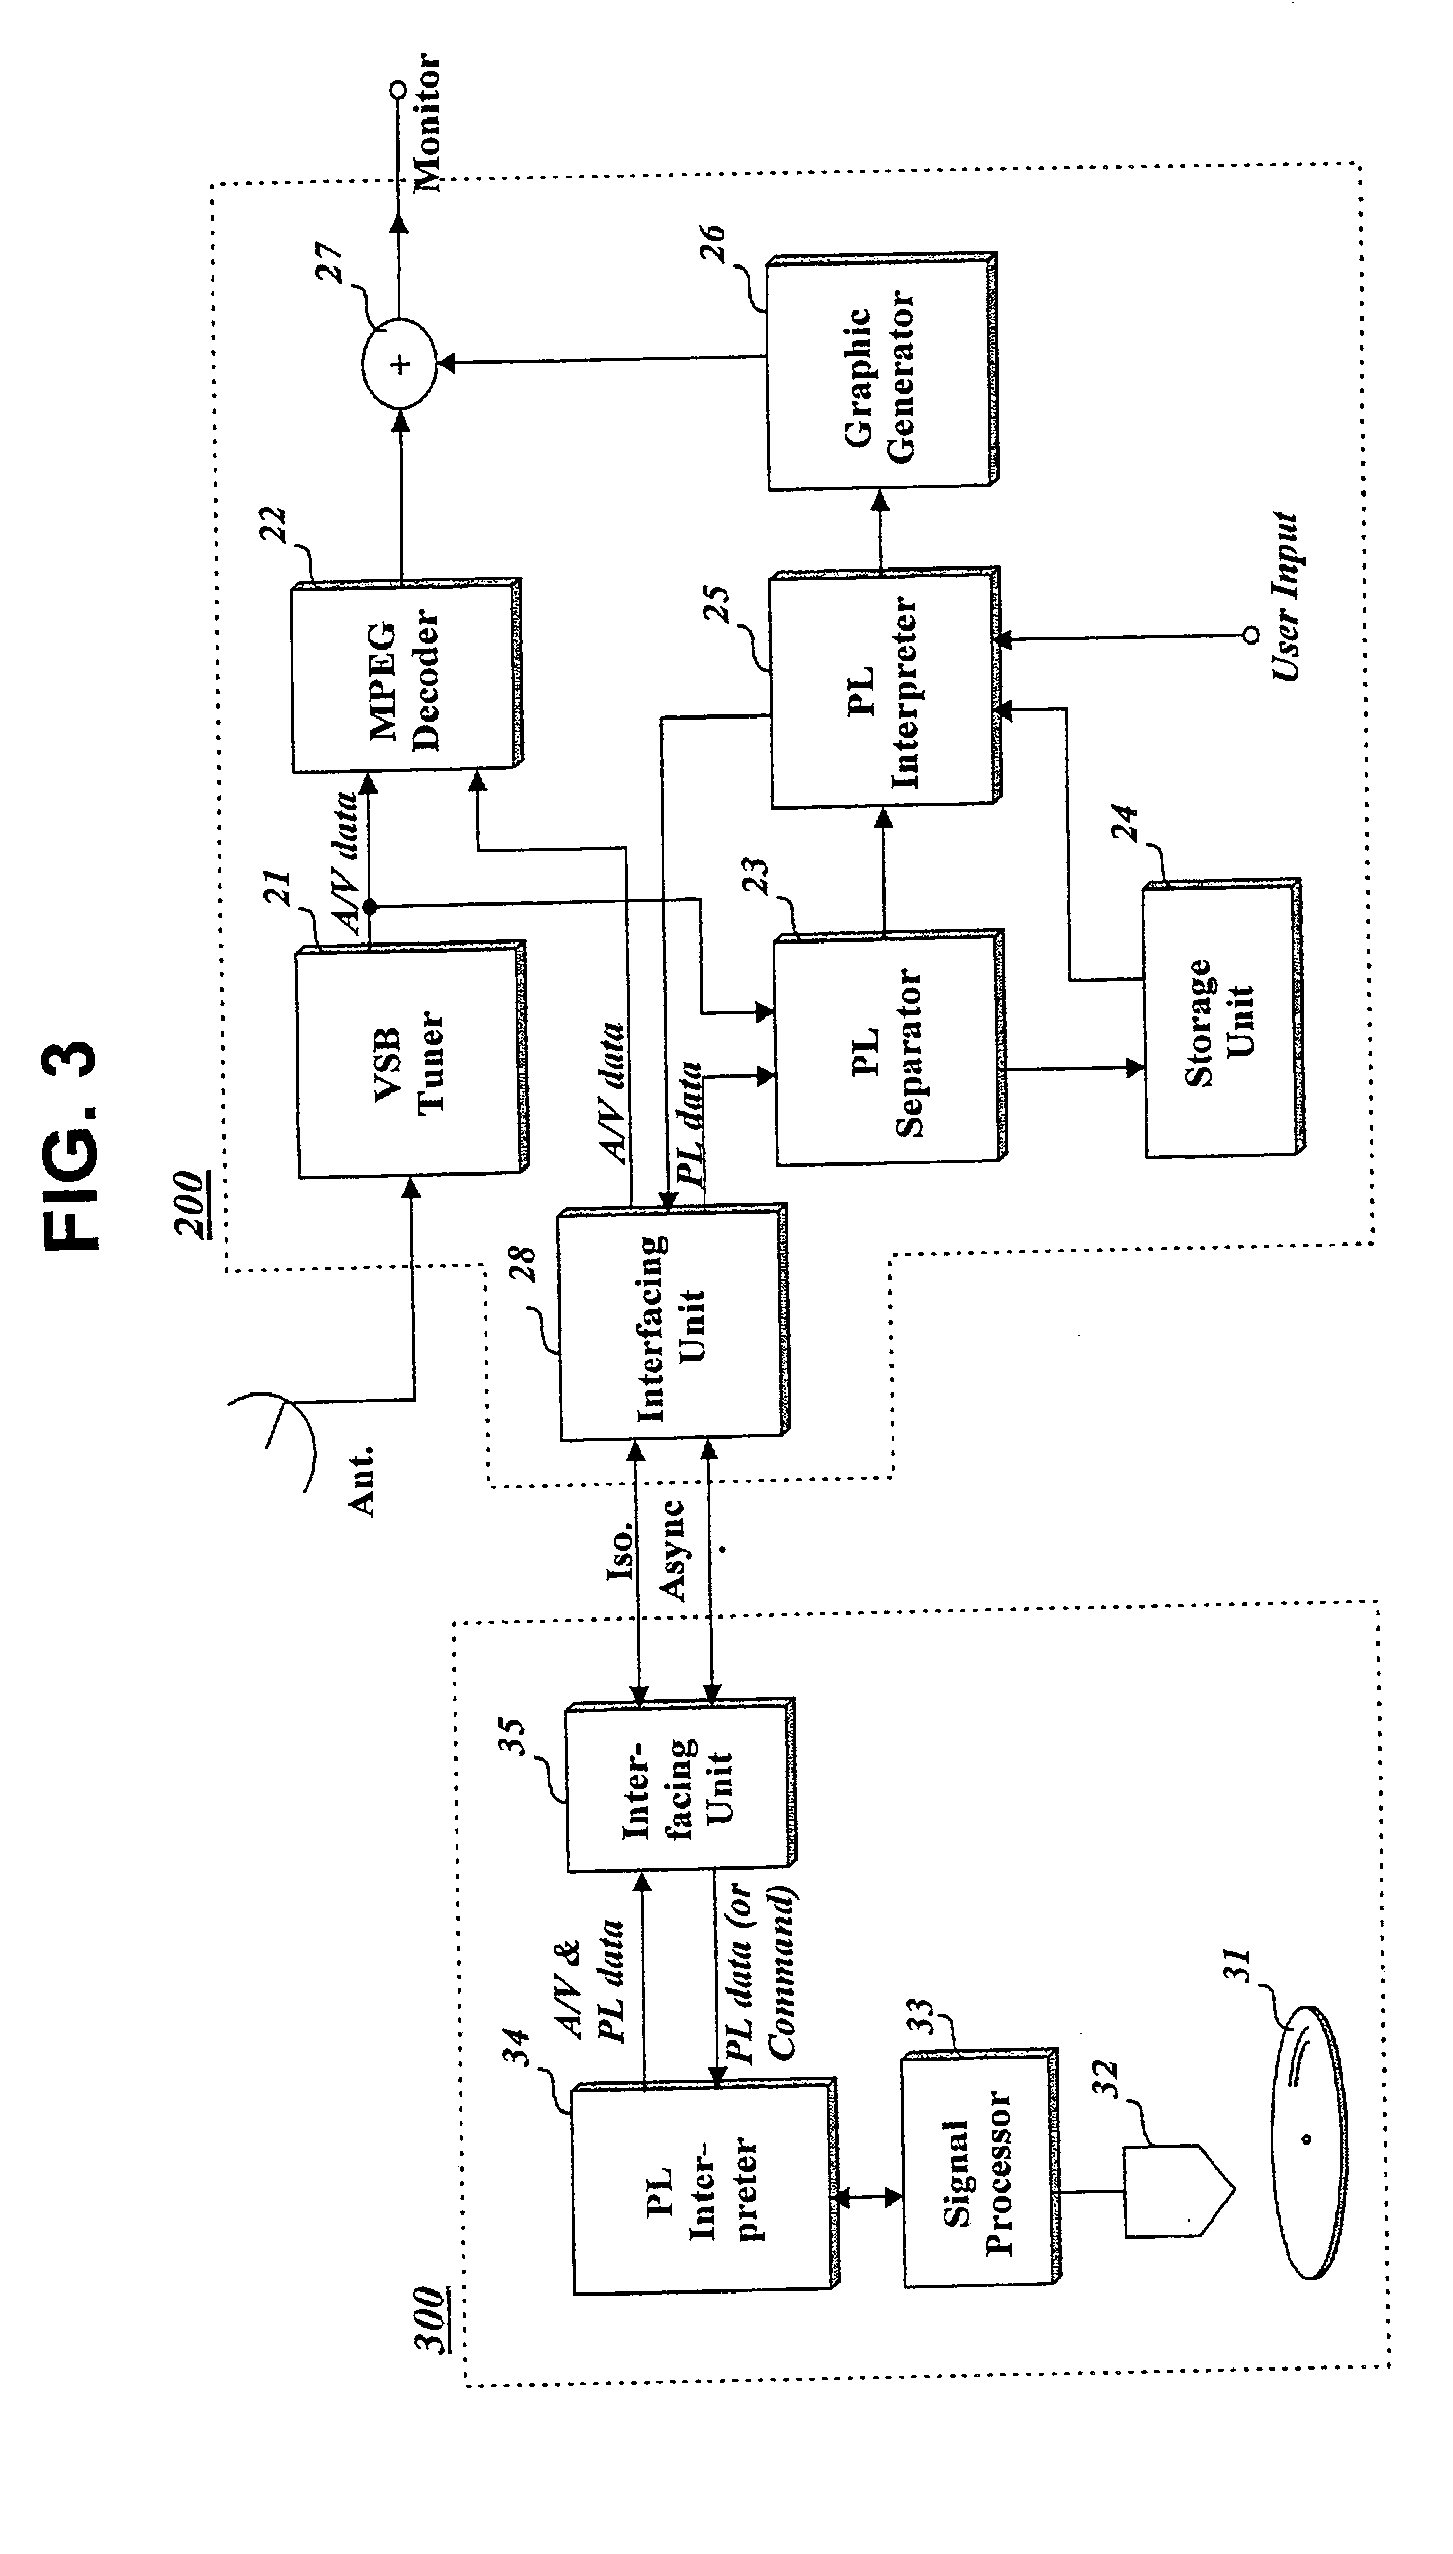 Recording Medium Containing Supplementary Service Information For Audio/Video Contents, and Method and Apparatus of Providing Supplementary Service Information of the Recording Medium